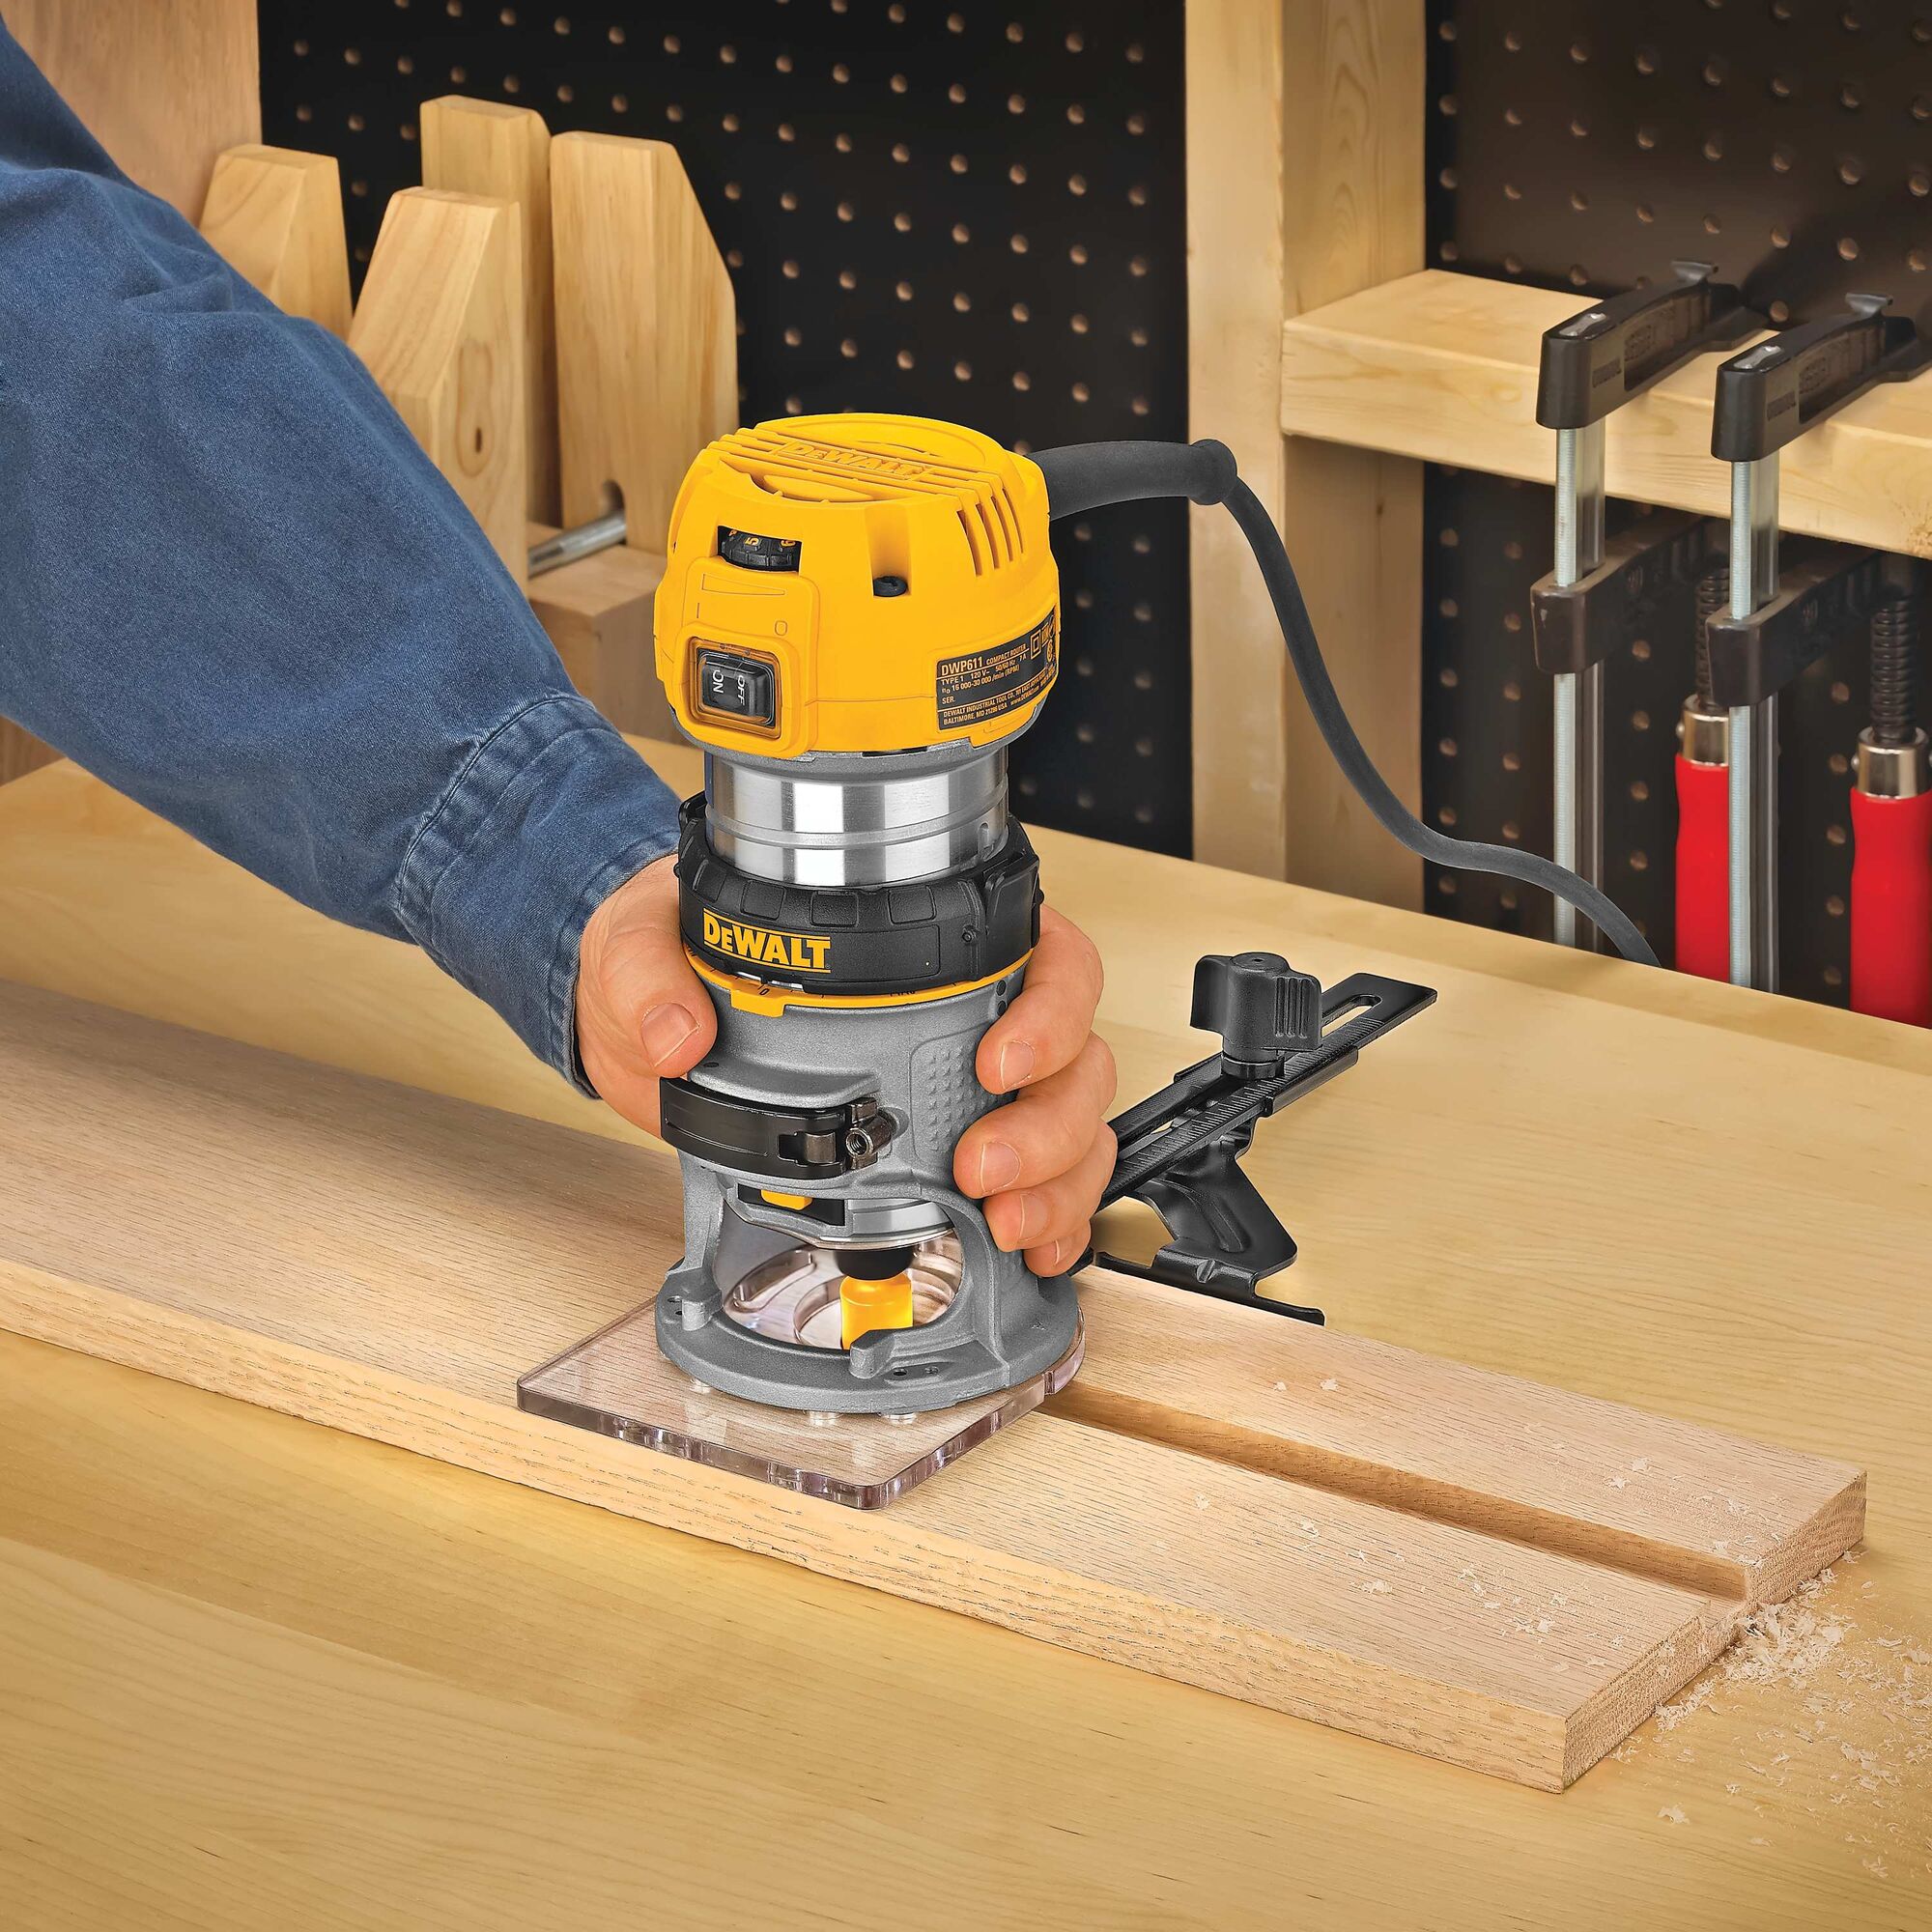 1-1/4 HP Max Torque Variable Speed Compact Router | DEWALT